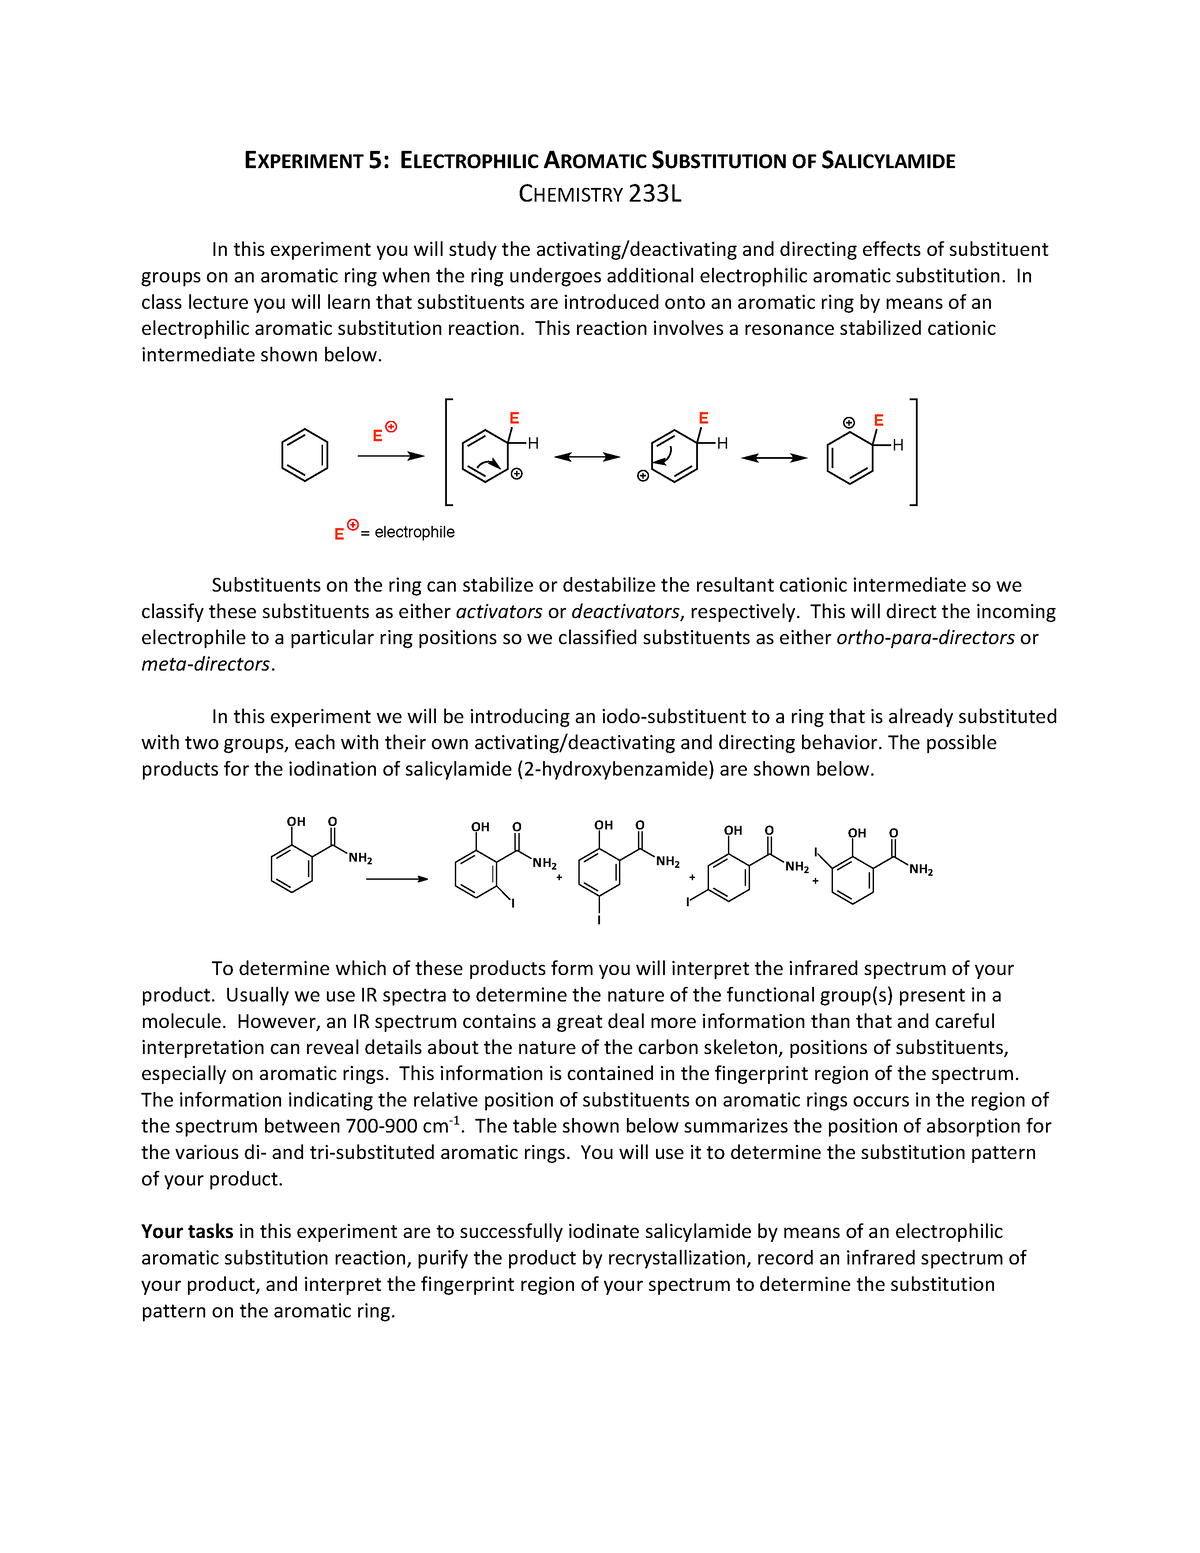 How To Find The Most Reactive Position In Electrophilic Aromatic  Substitution Reactions?